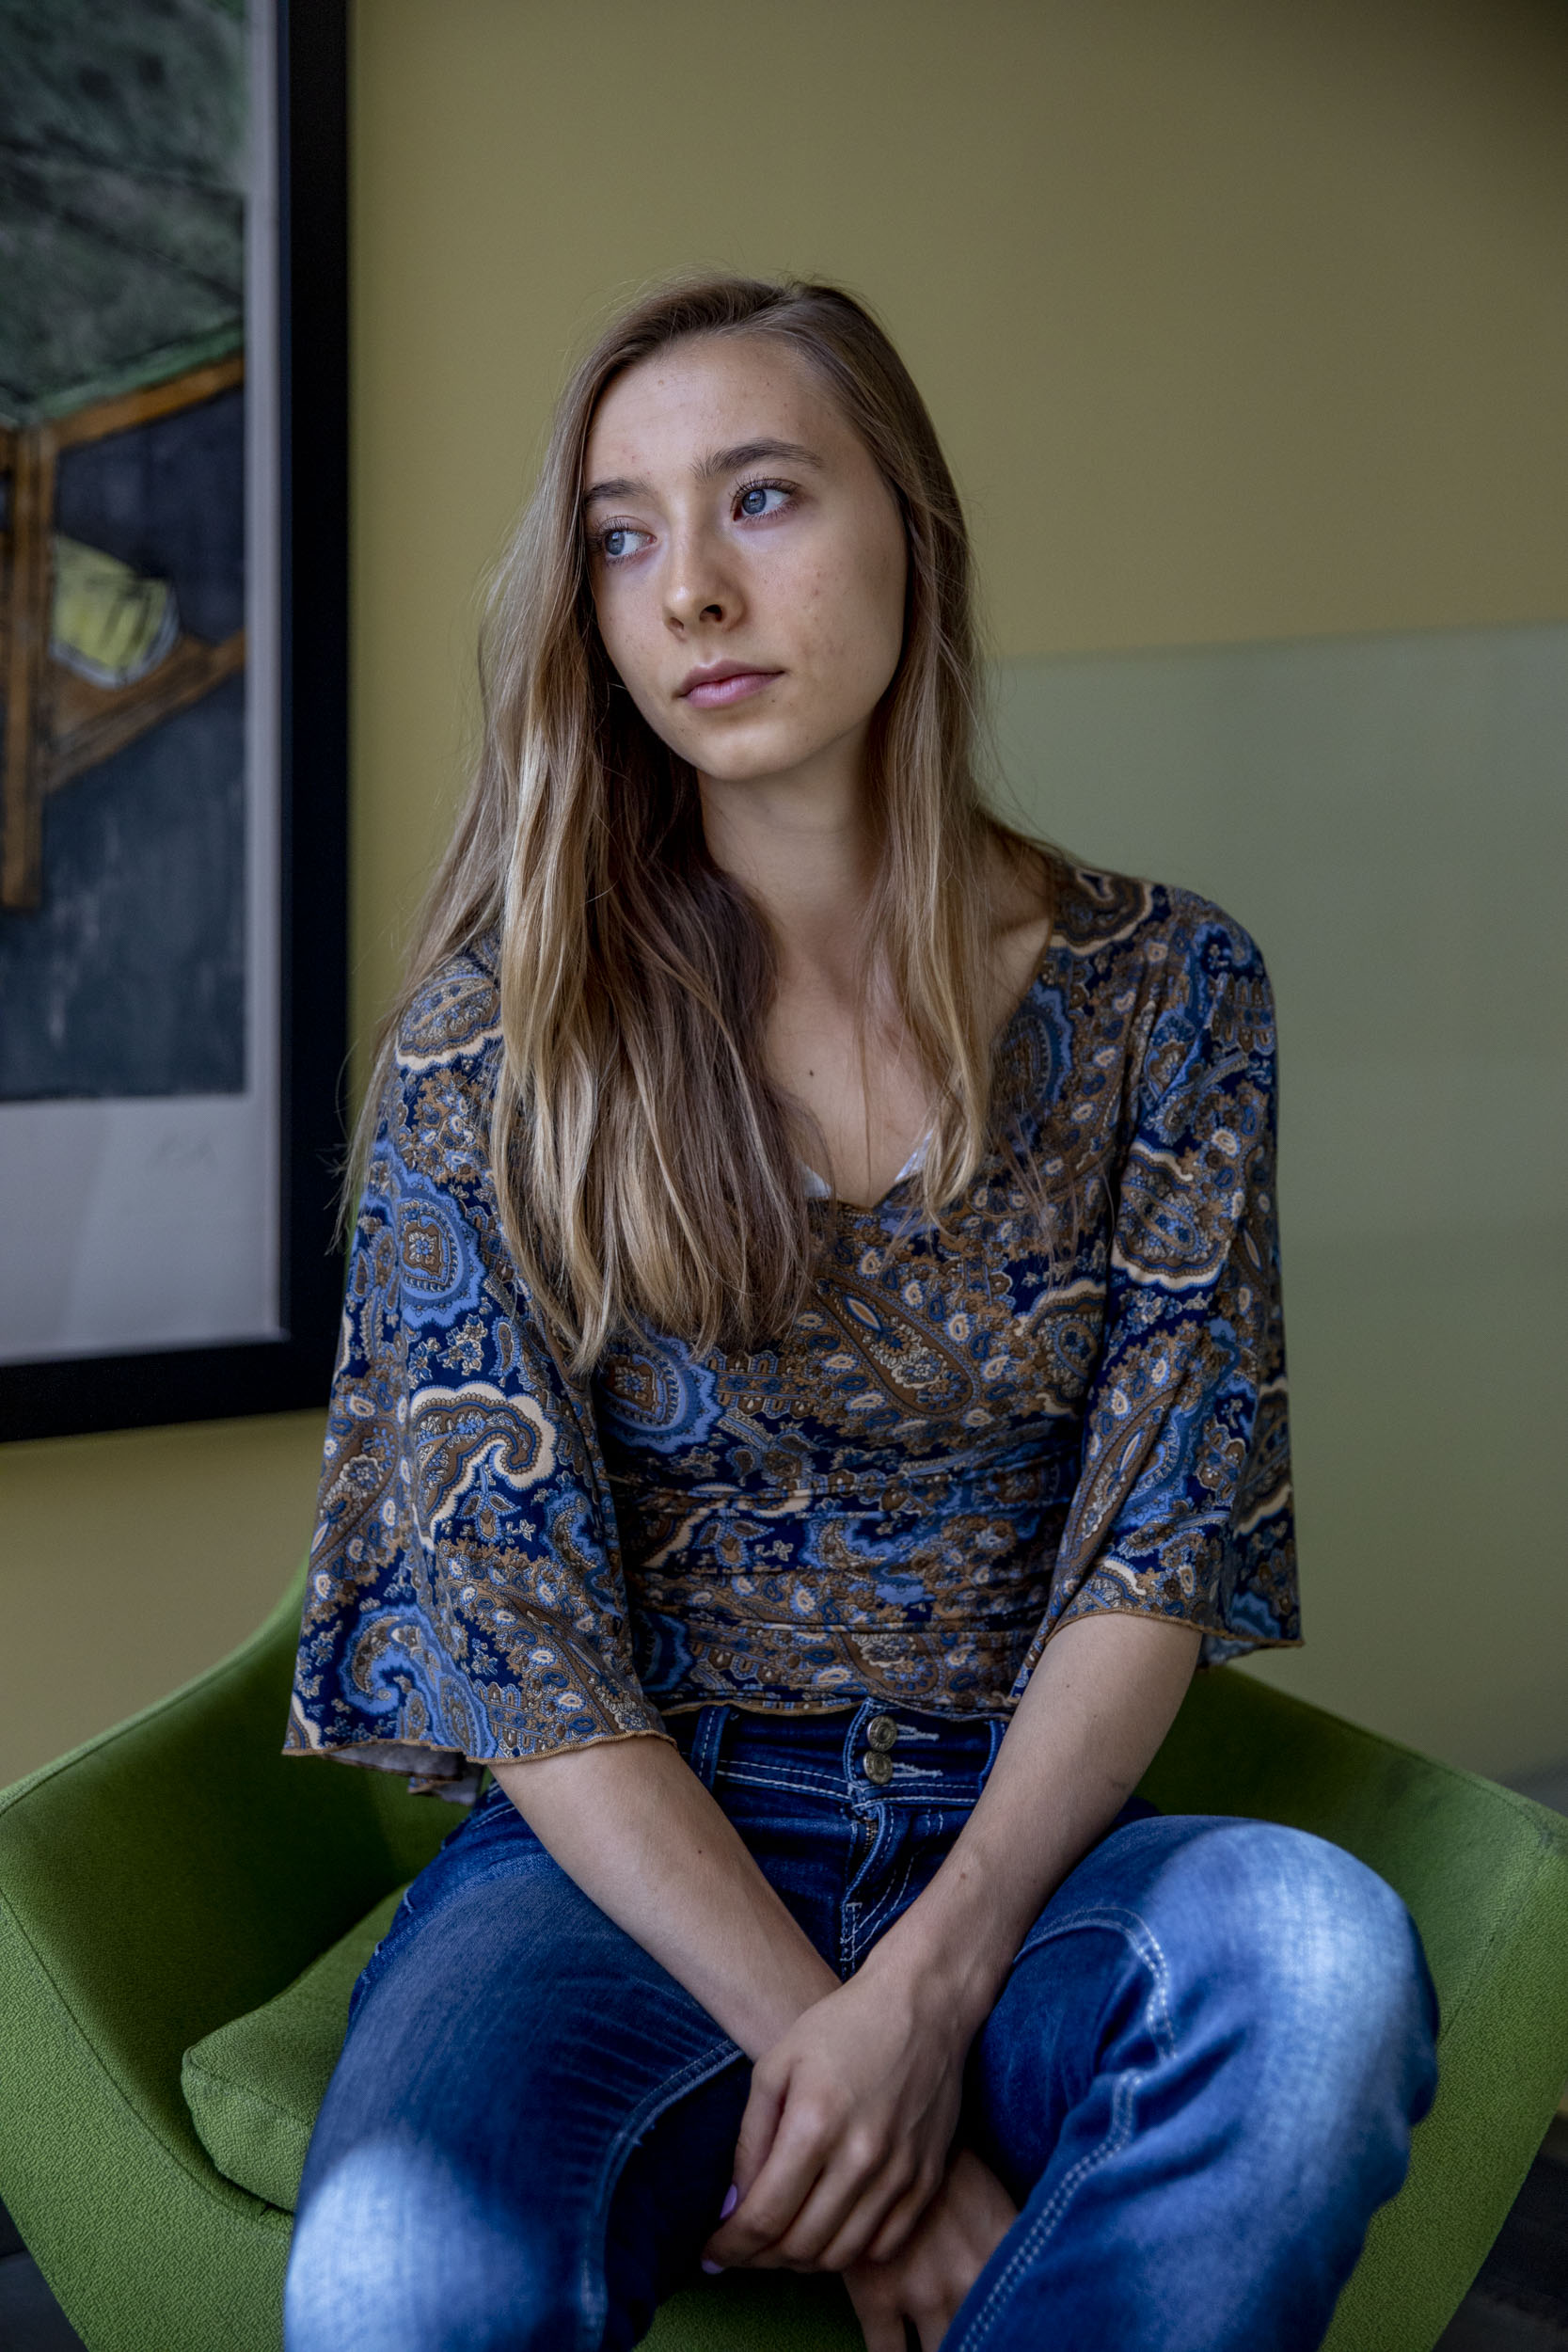 Nataya Foss is the chair of the Snohomish County Youth Action Committee, which provides oversight for the county's federally funded Youth Homelessness Demonstration Program. She experienced homelessness when she was 17. (Photo by Dorothy Edwards/Crosscut)